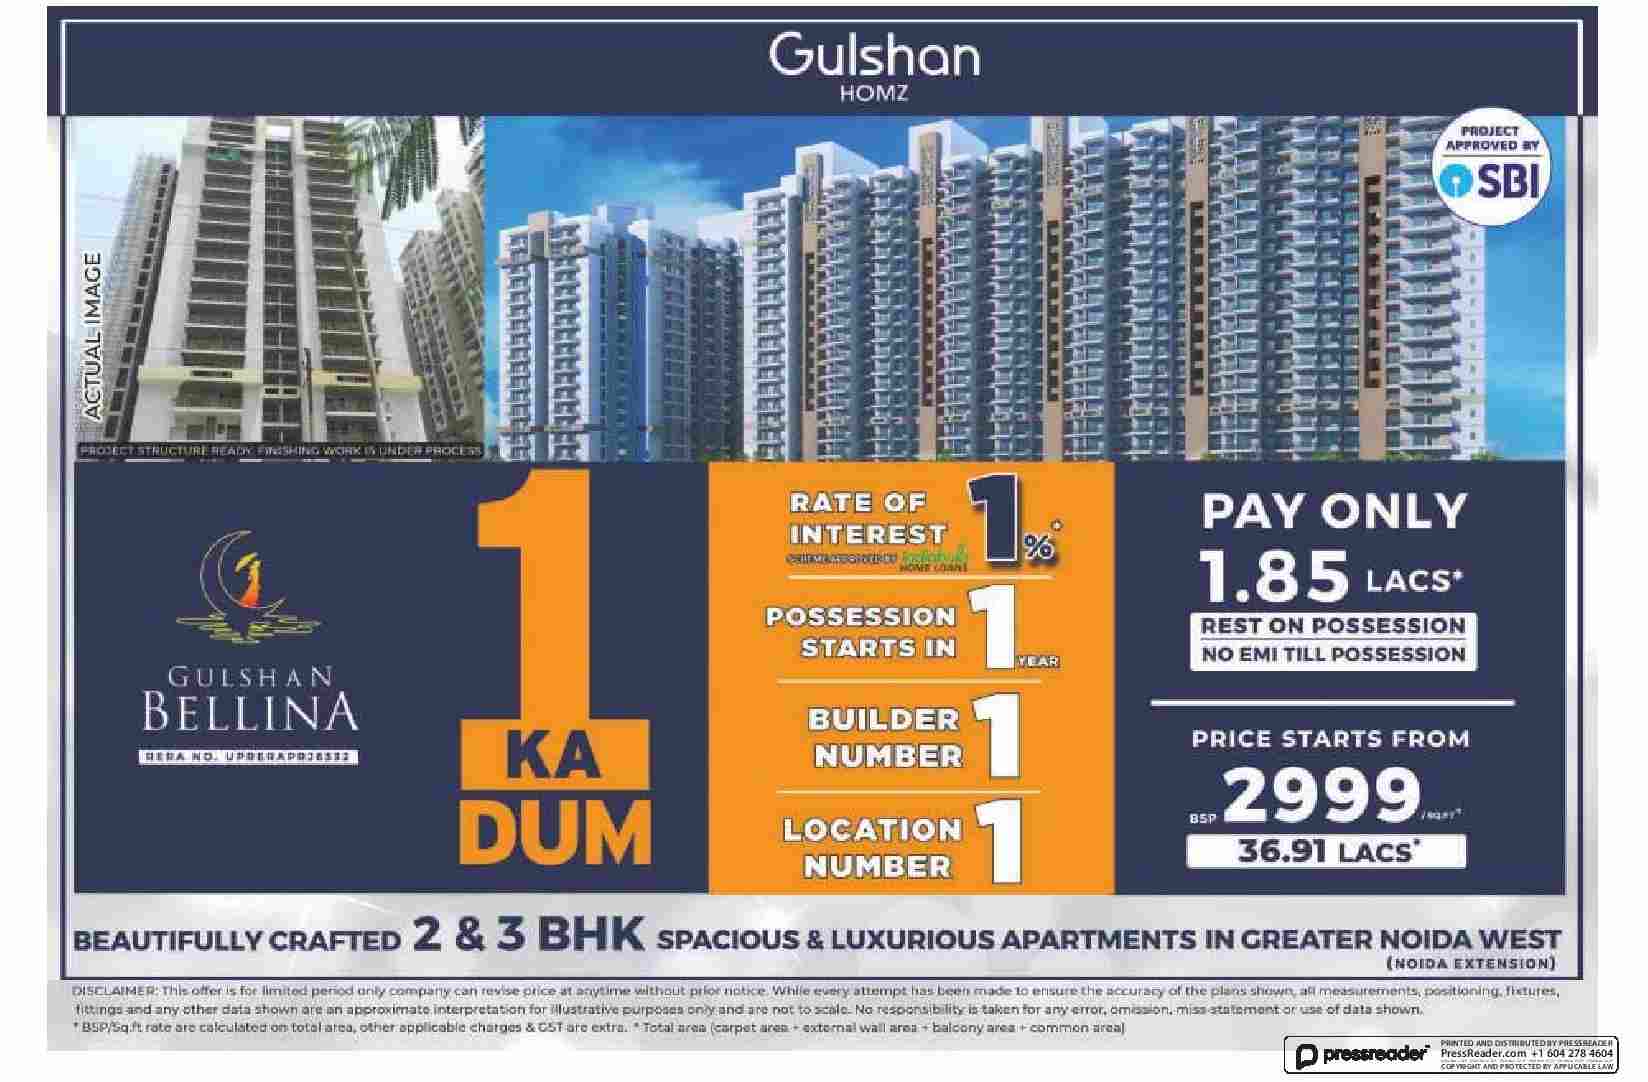 Pay only Rs. 1.85 Lacs and rest on possession at Gulshan Bellina in Greater Noida